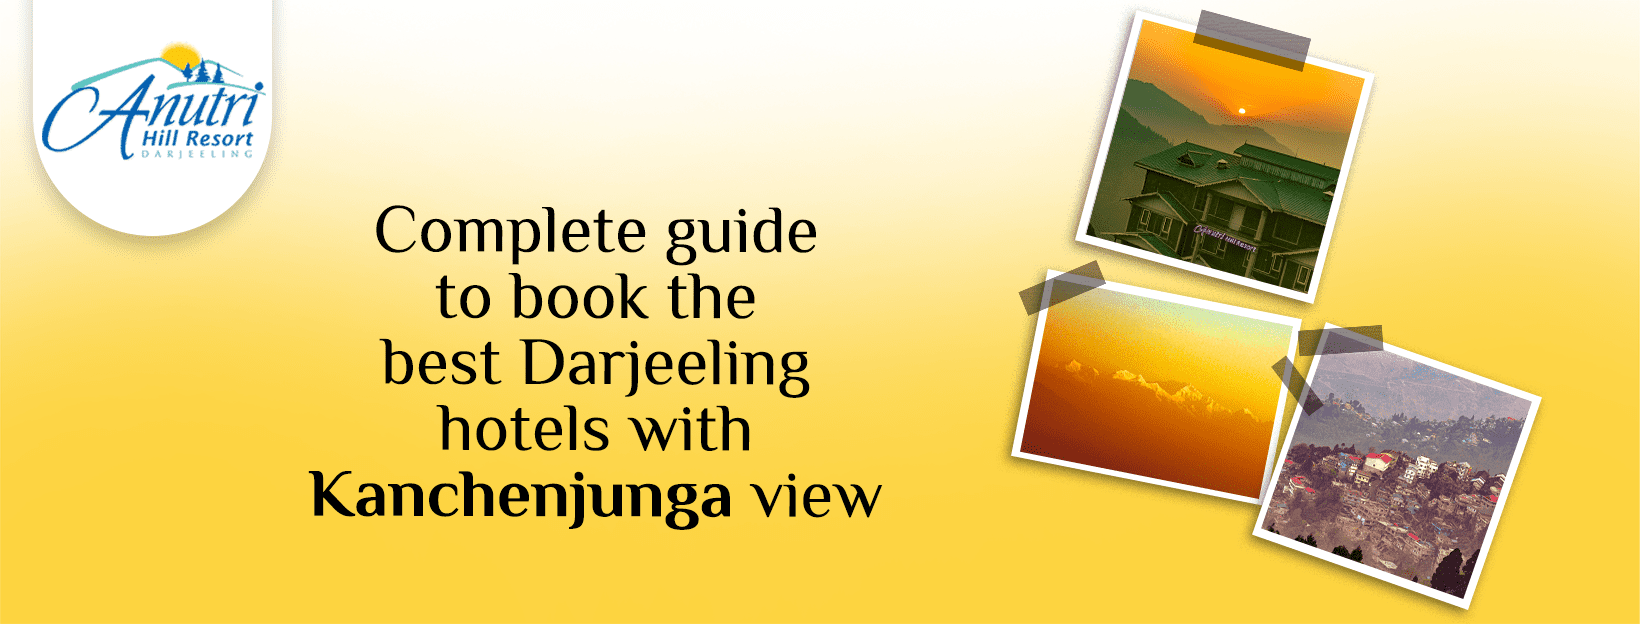 Complete guide to book the best Darjeeling hotels with Kanchenjunga view